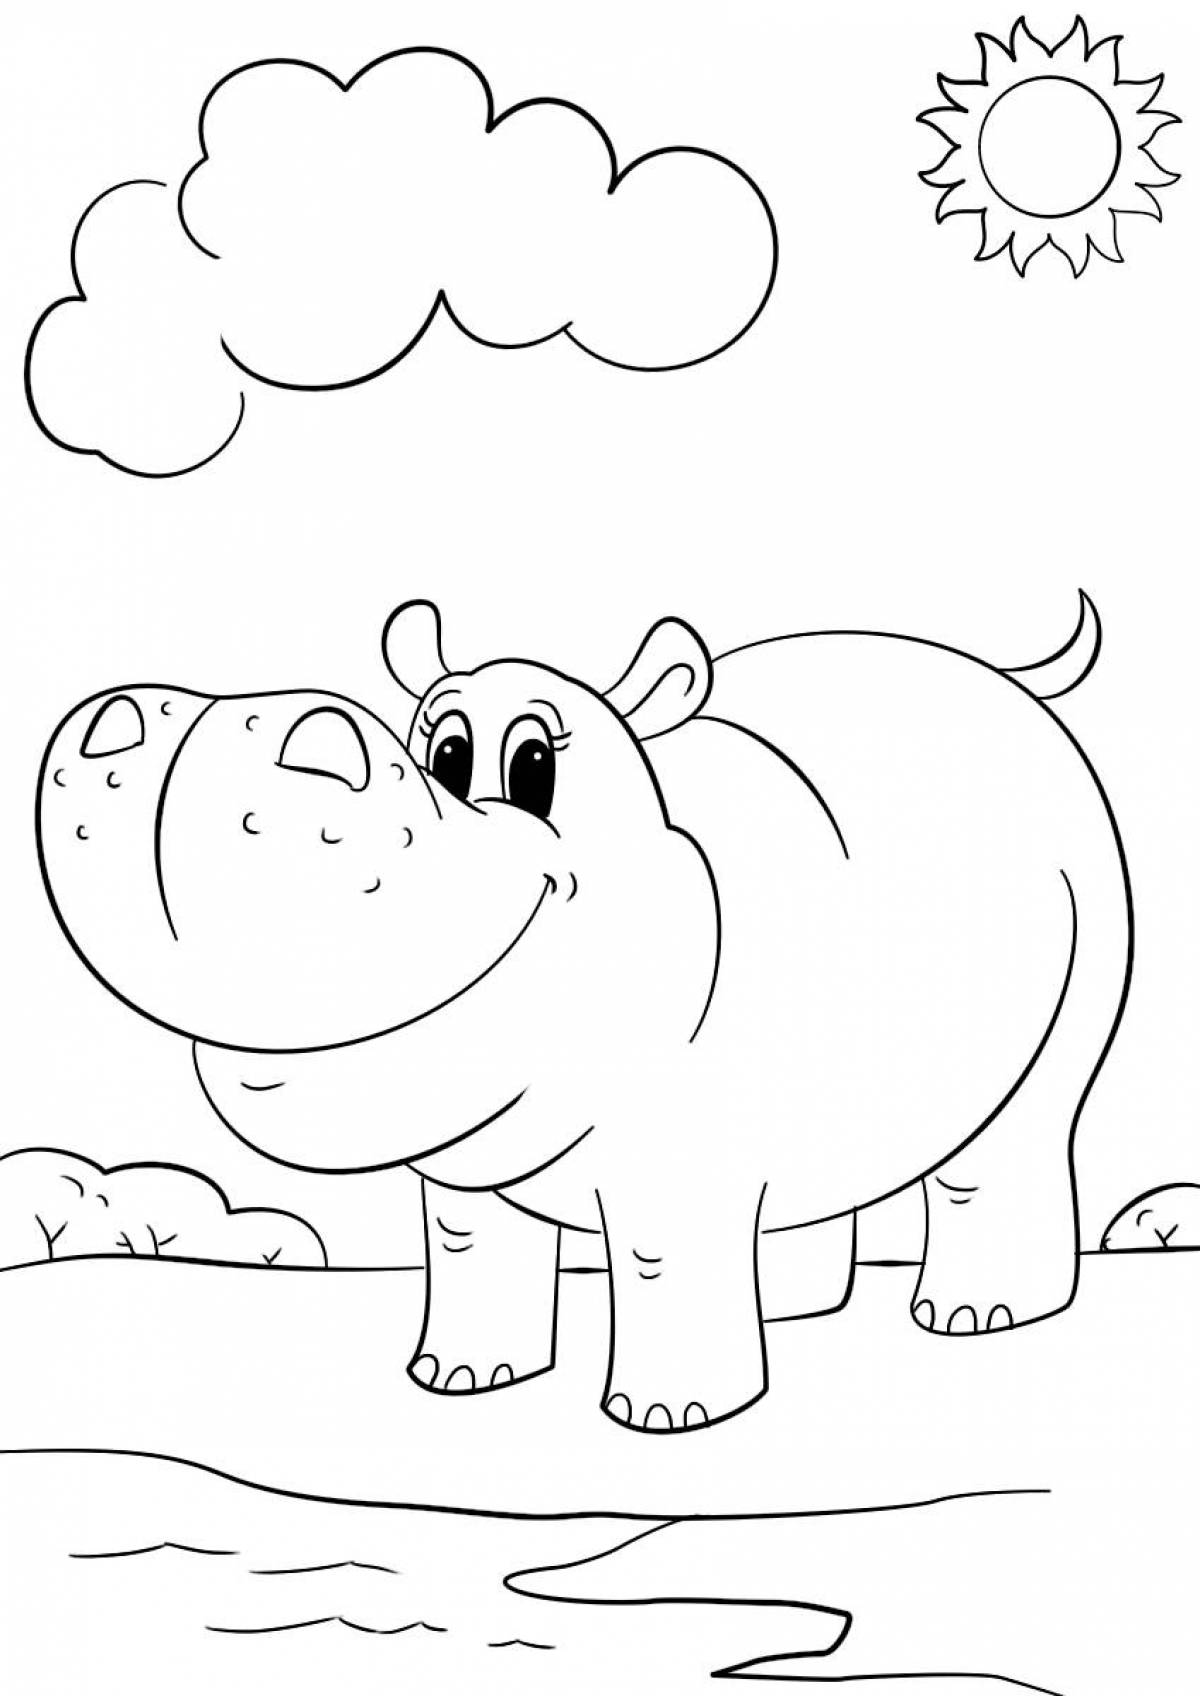 Outstanding hippo coloring page for kids